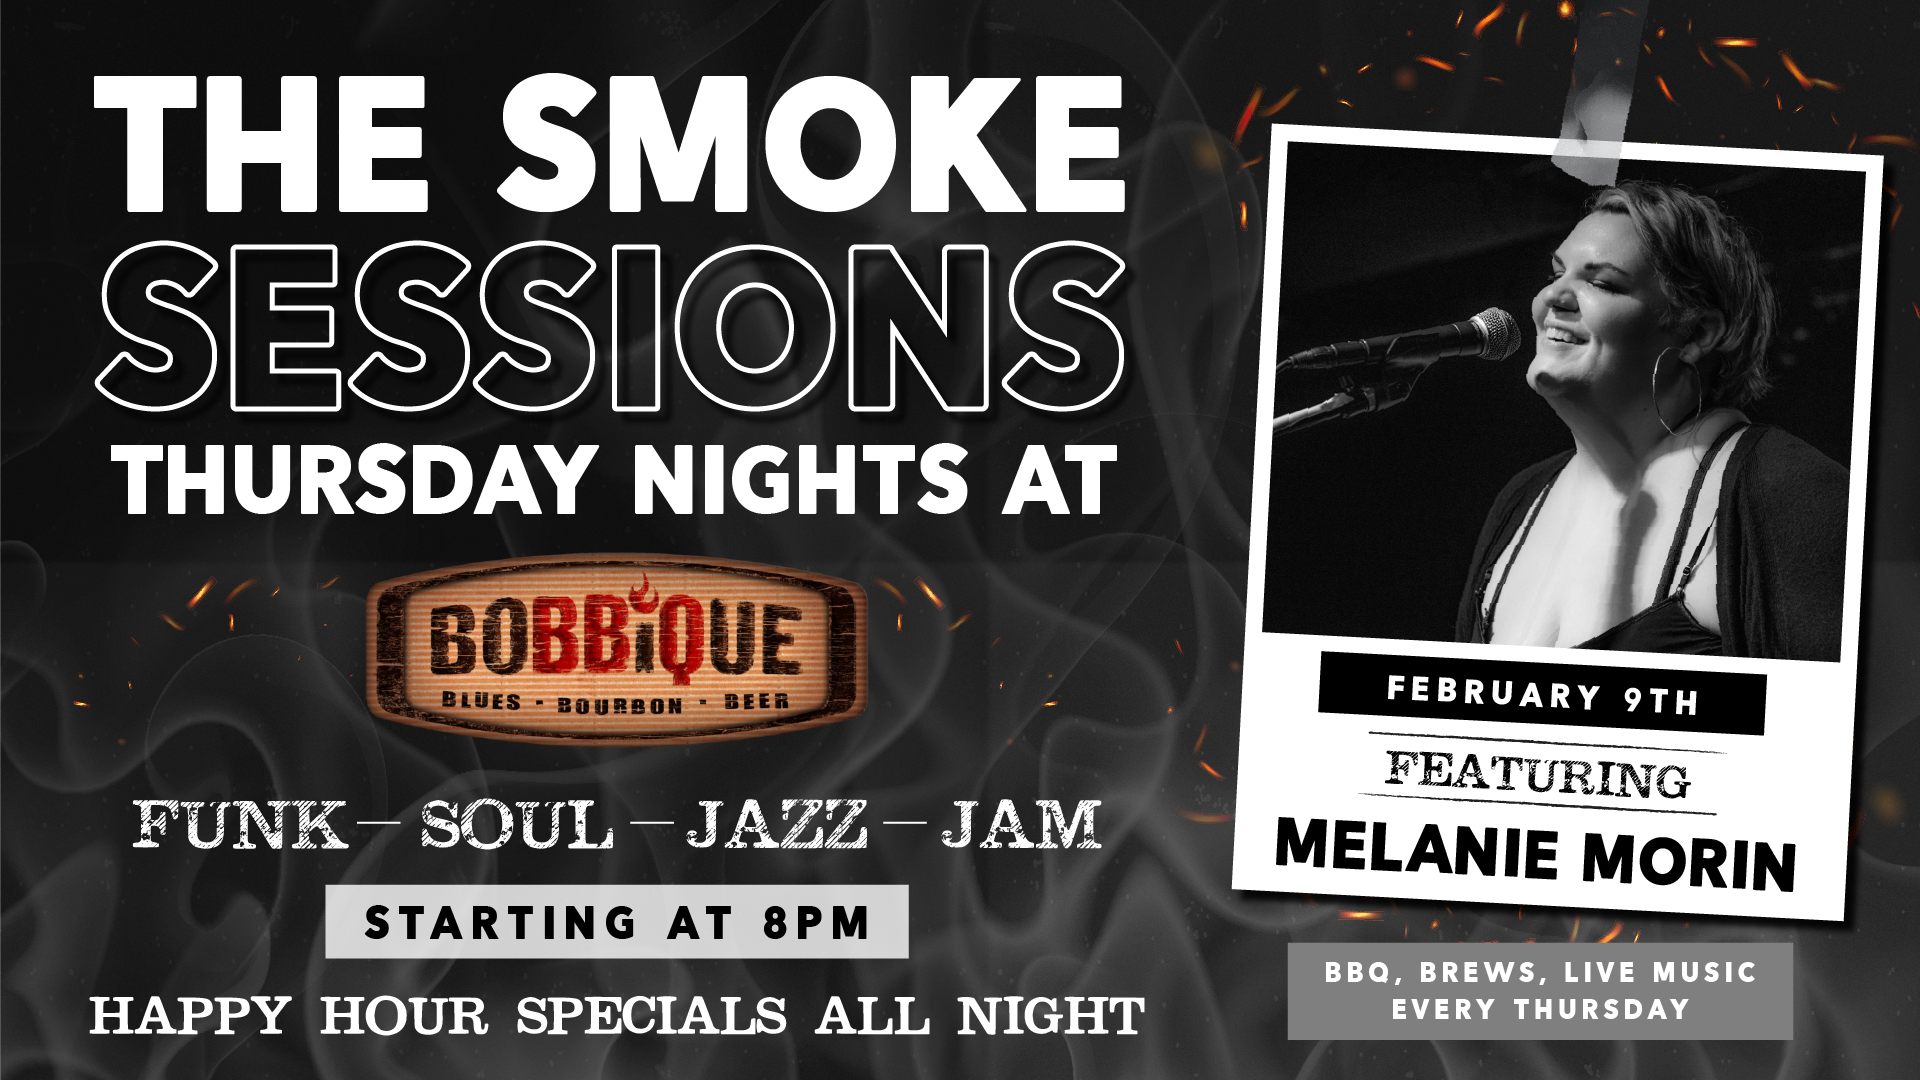 The Smoke Sessions with Melanie Morin